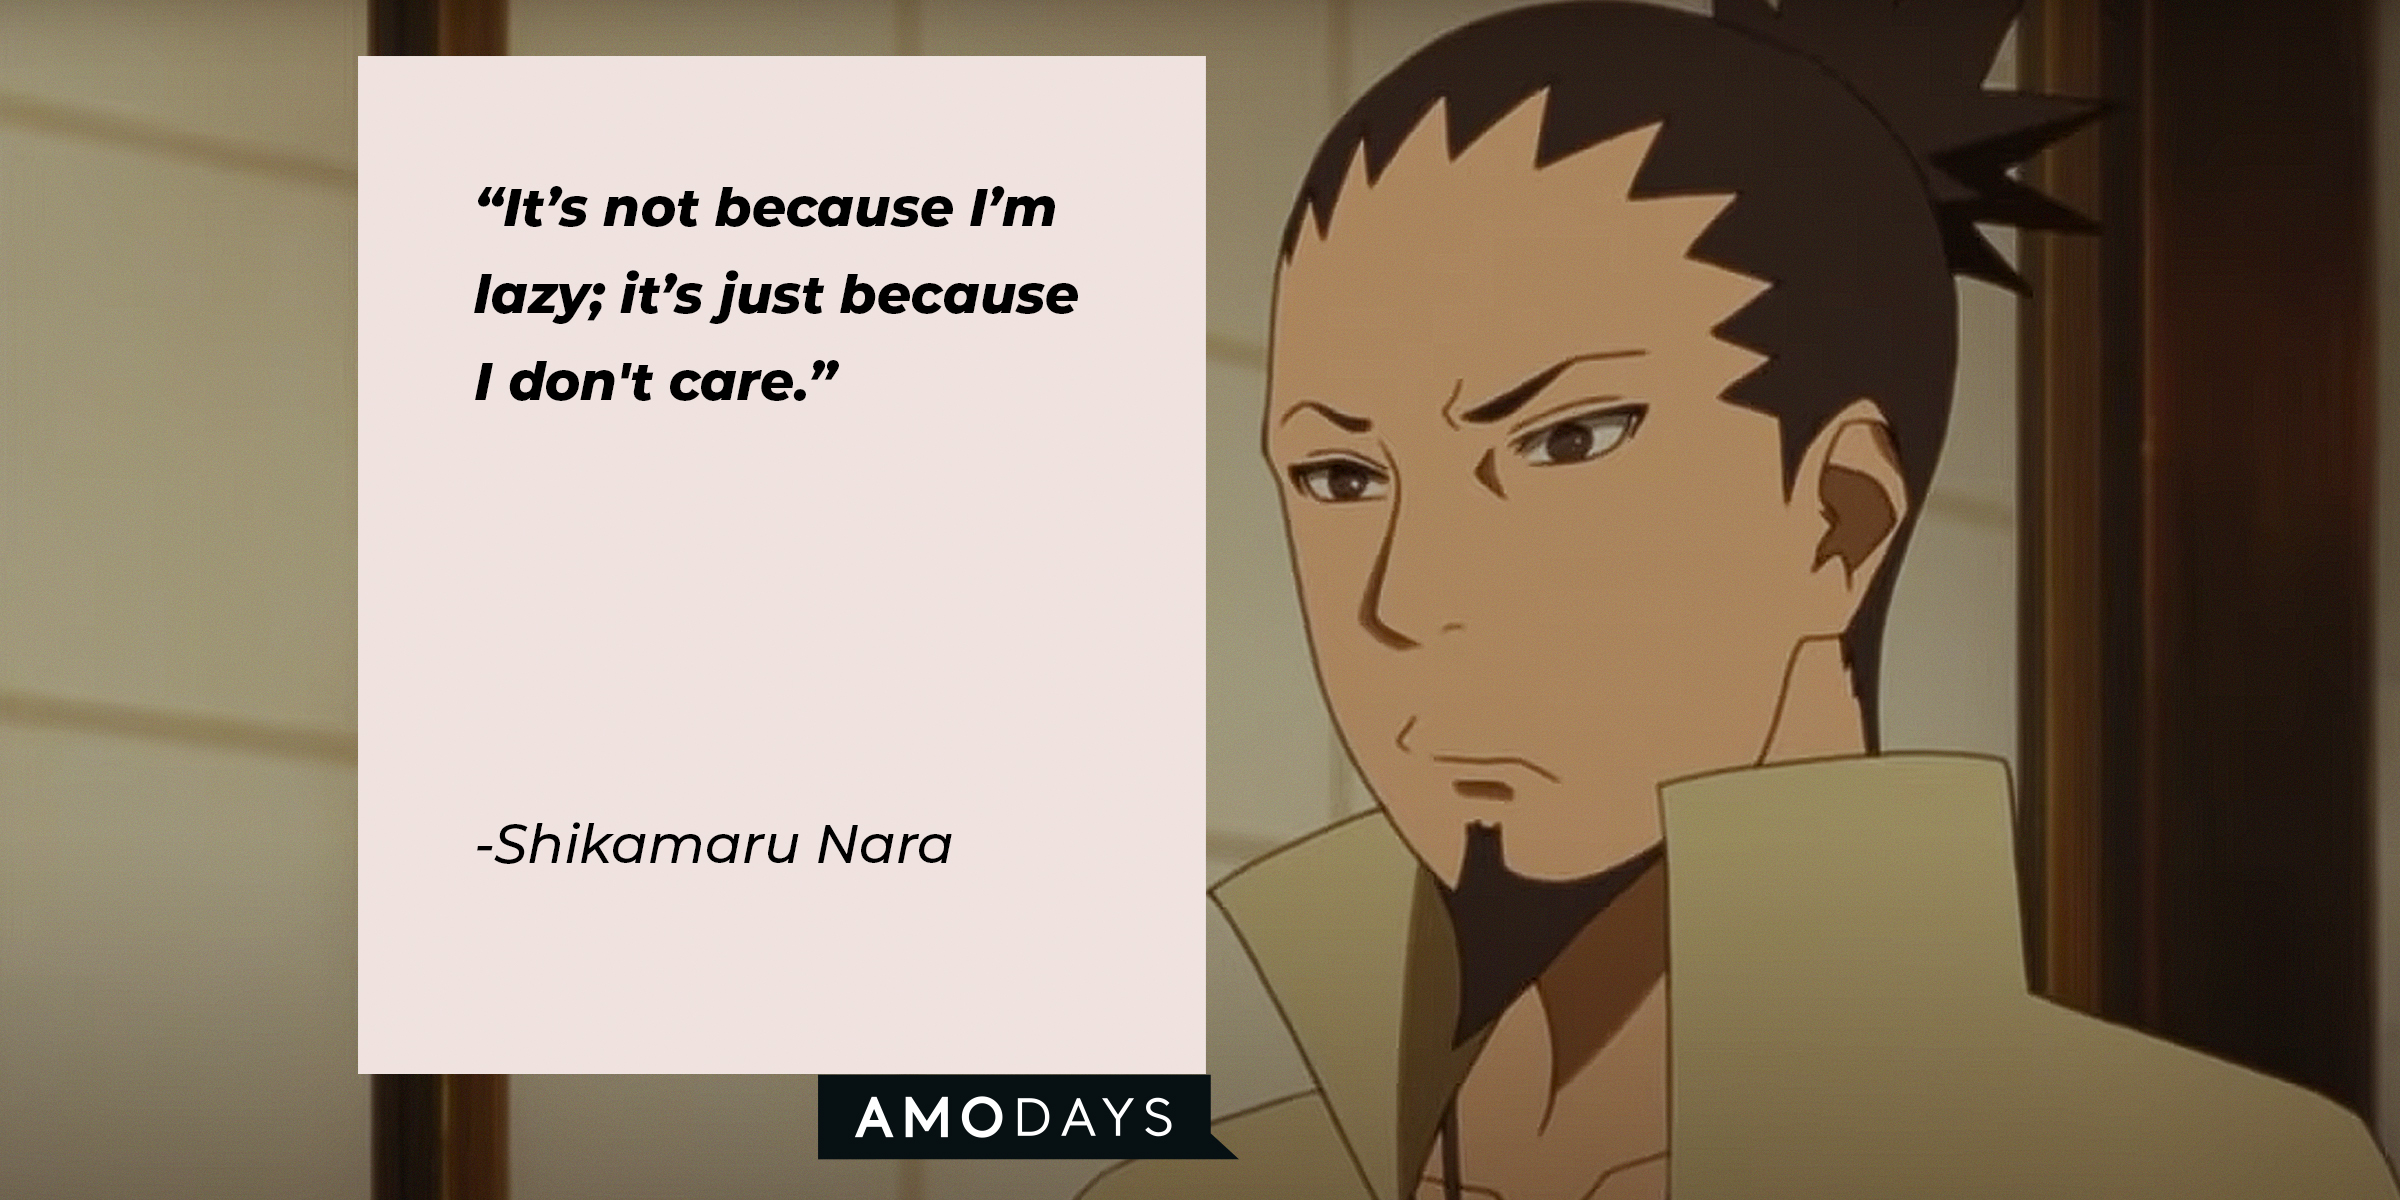 An animated picture of Shikamaru with his own quote:"It's not because I'm lazy, it's just because I don't care." | Source: youtube.com/CrunchyrollCollection